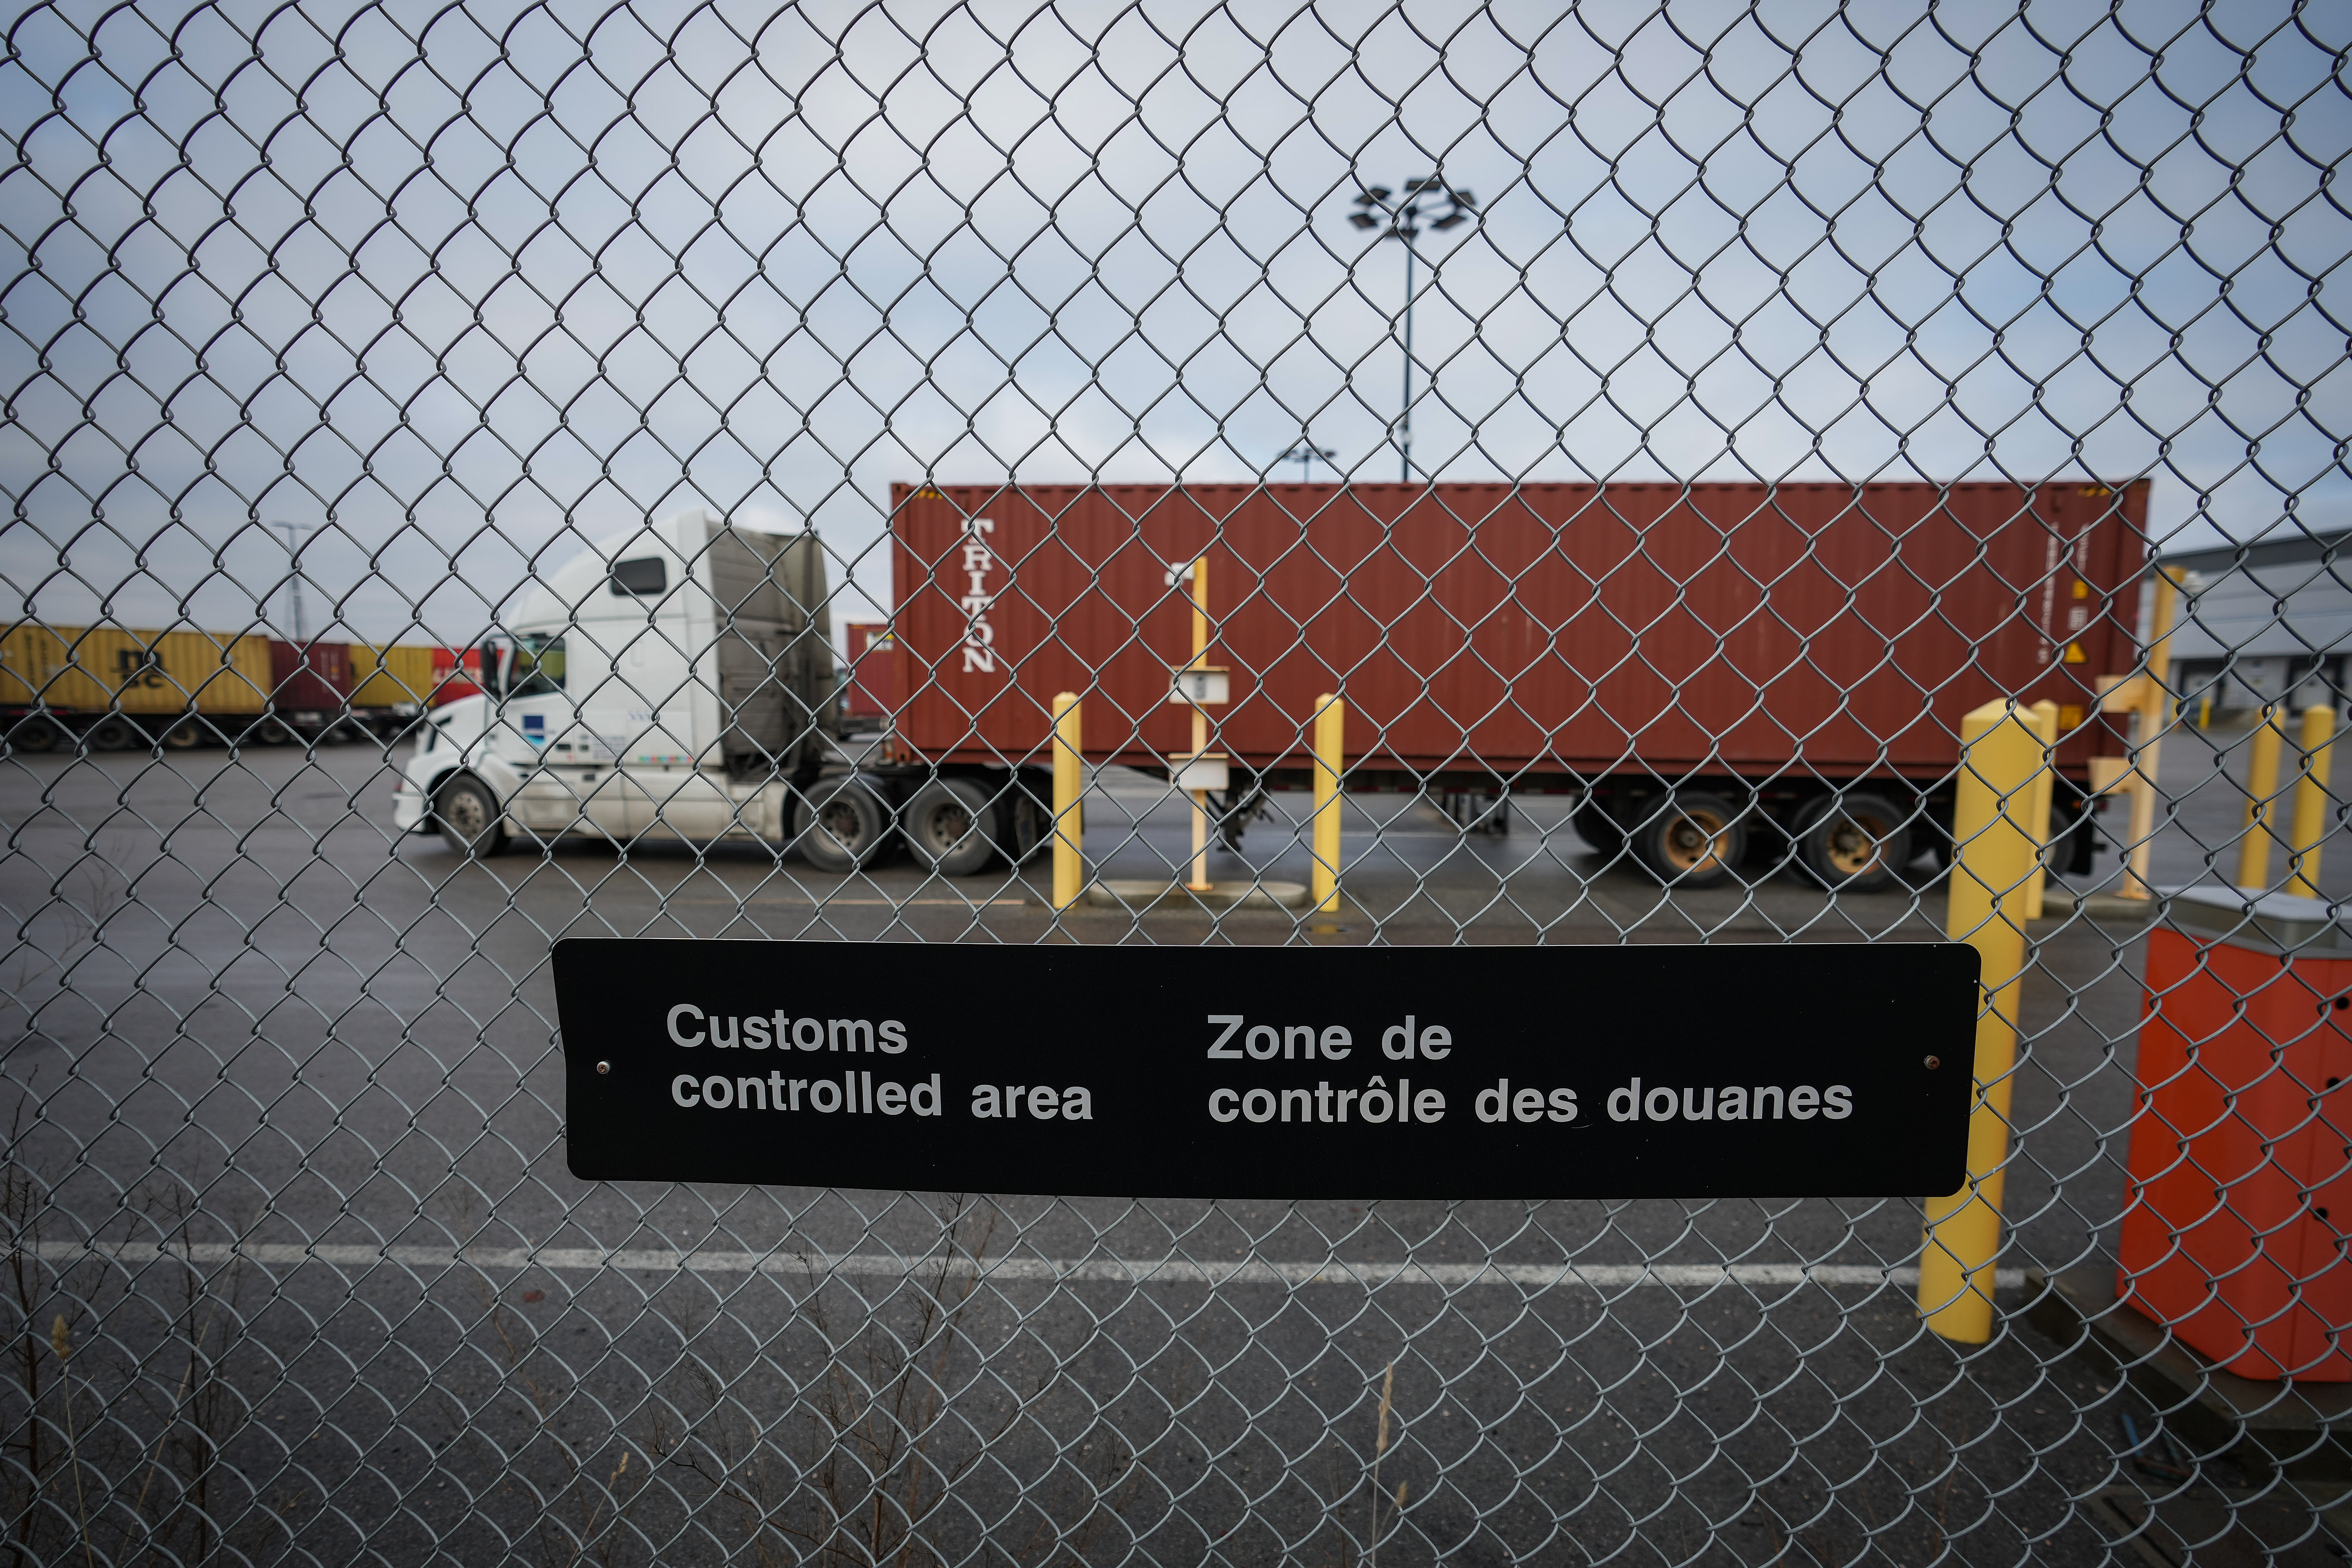 CBSA workers vote in favour of strike action, warn of border disruptions